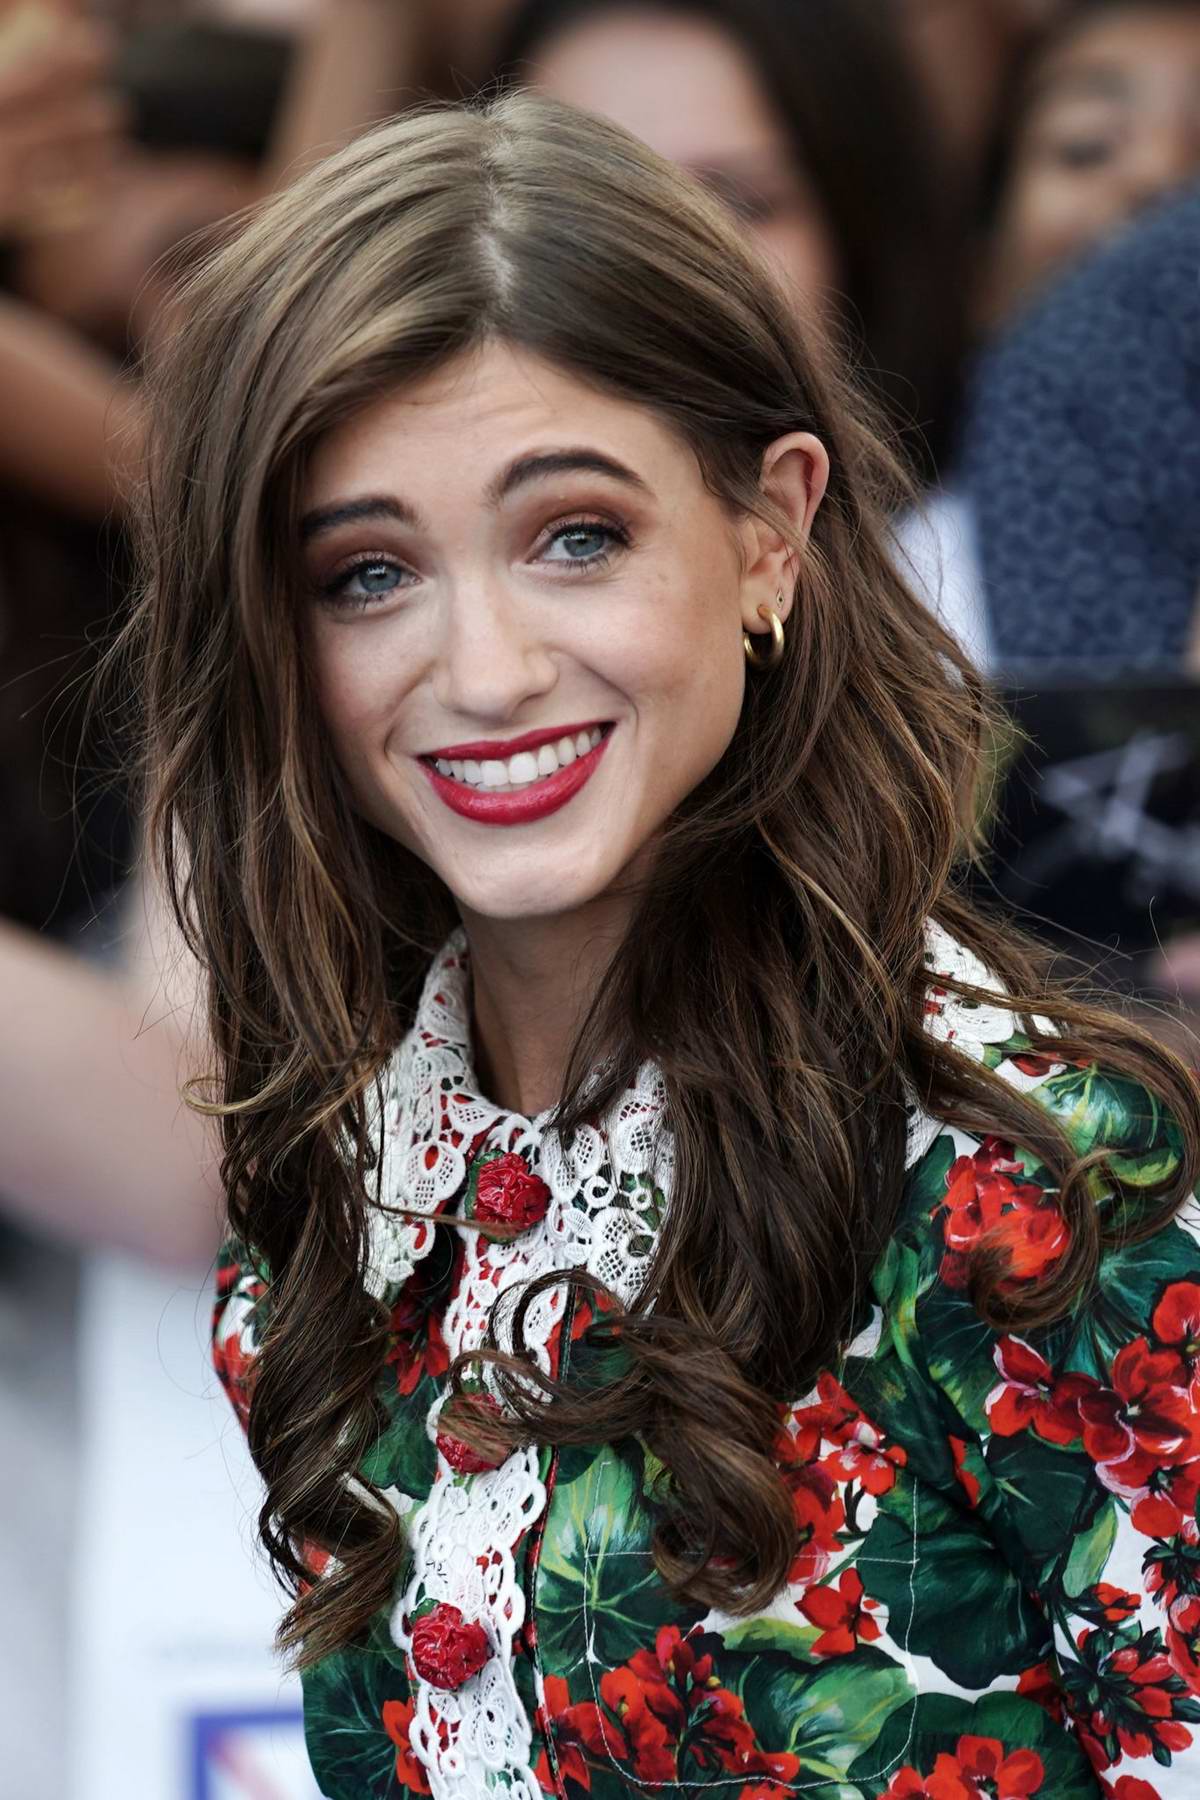 natalia-dyer-attends-the-2019-giffoni-film-festival-in-giffoni-valle-piana-italy-210719_11.jpg